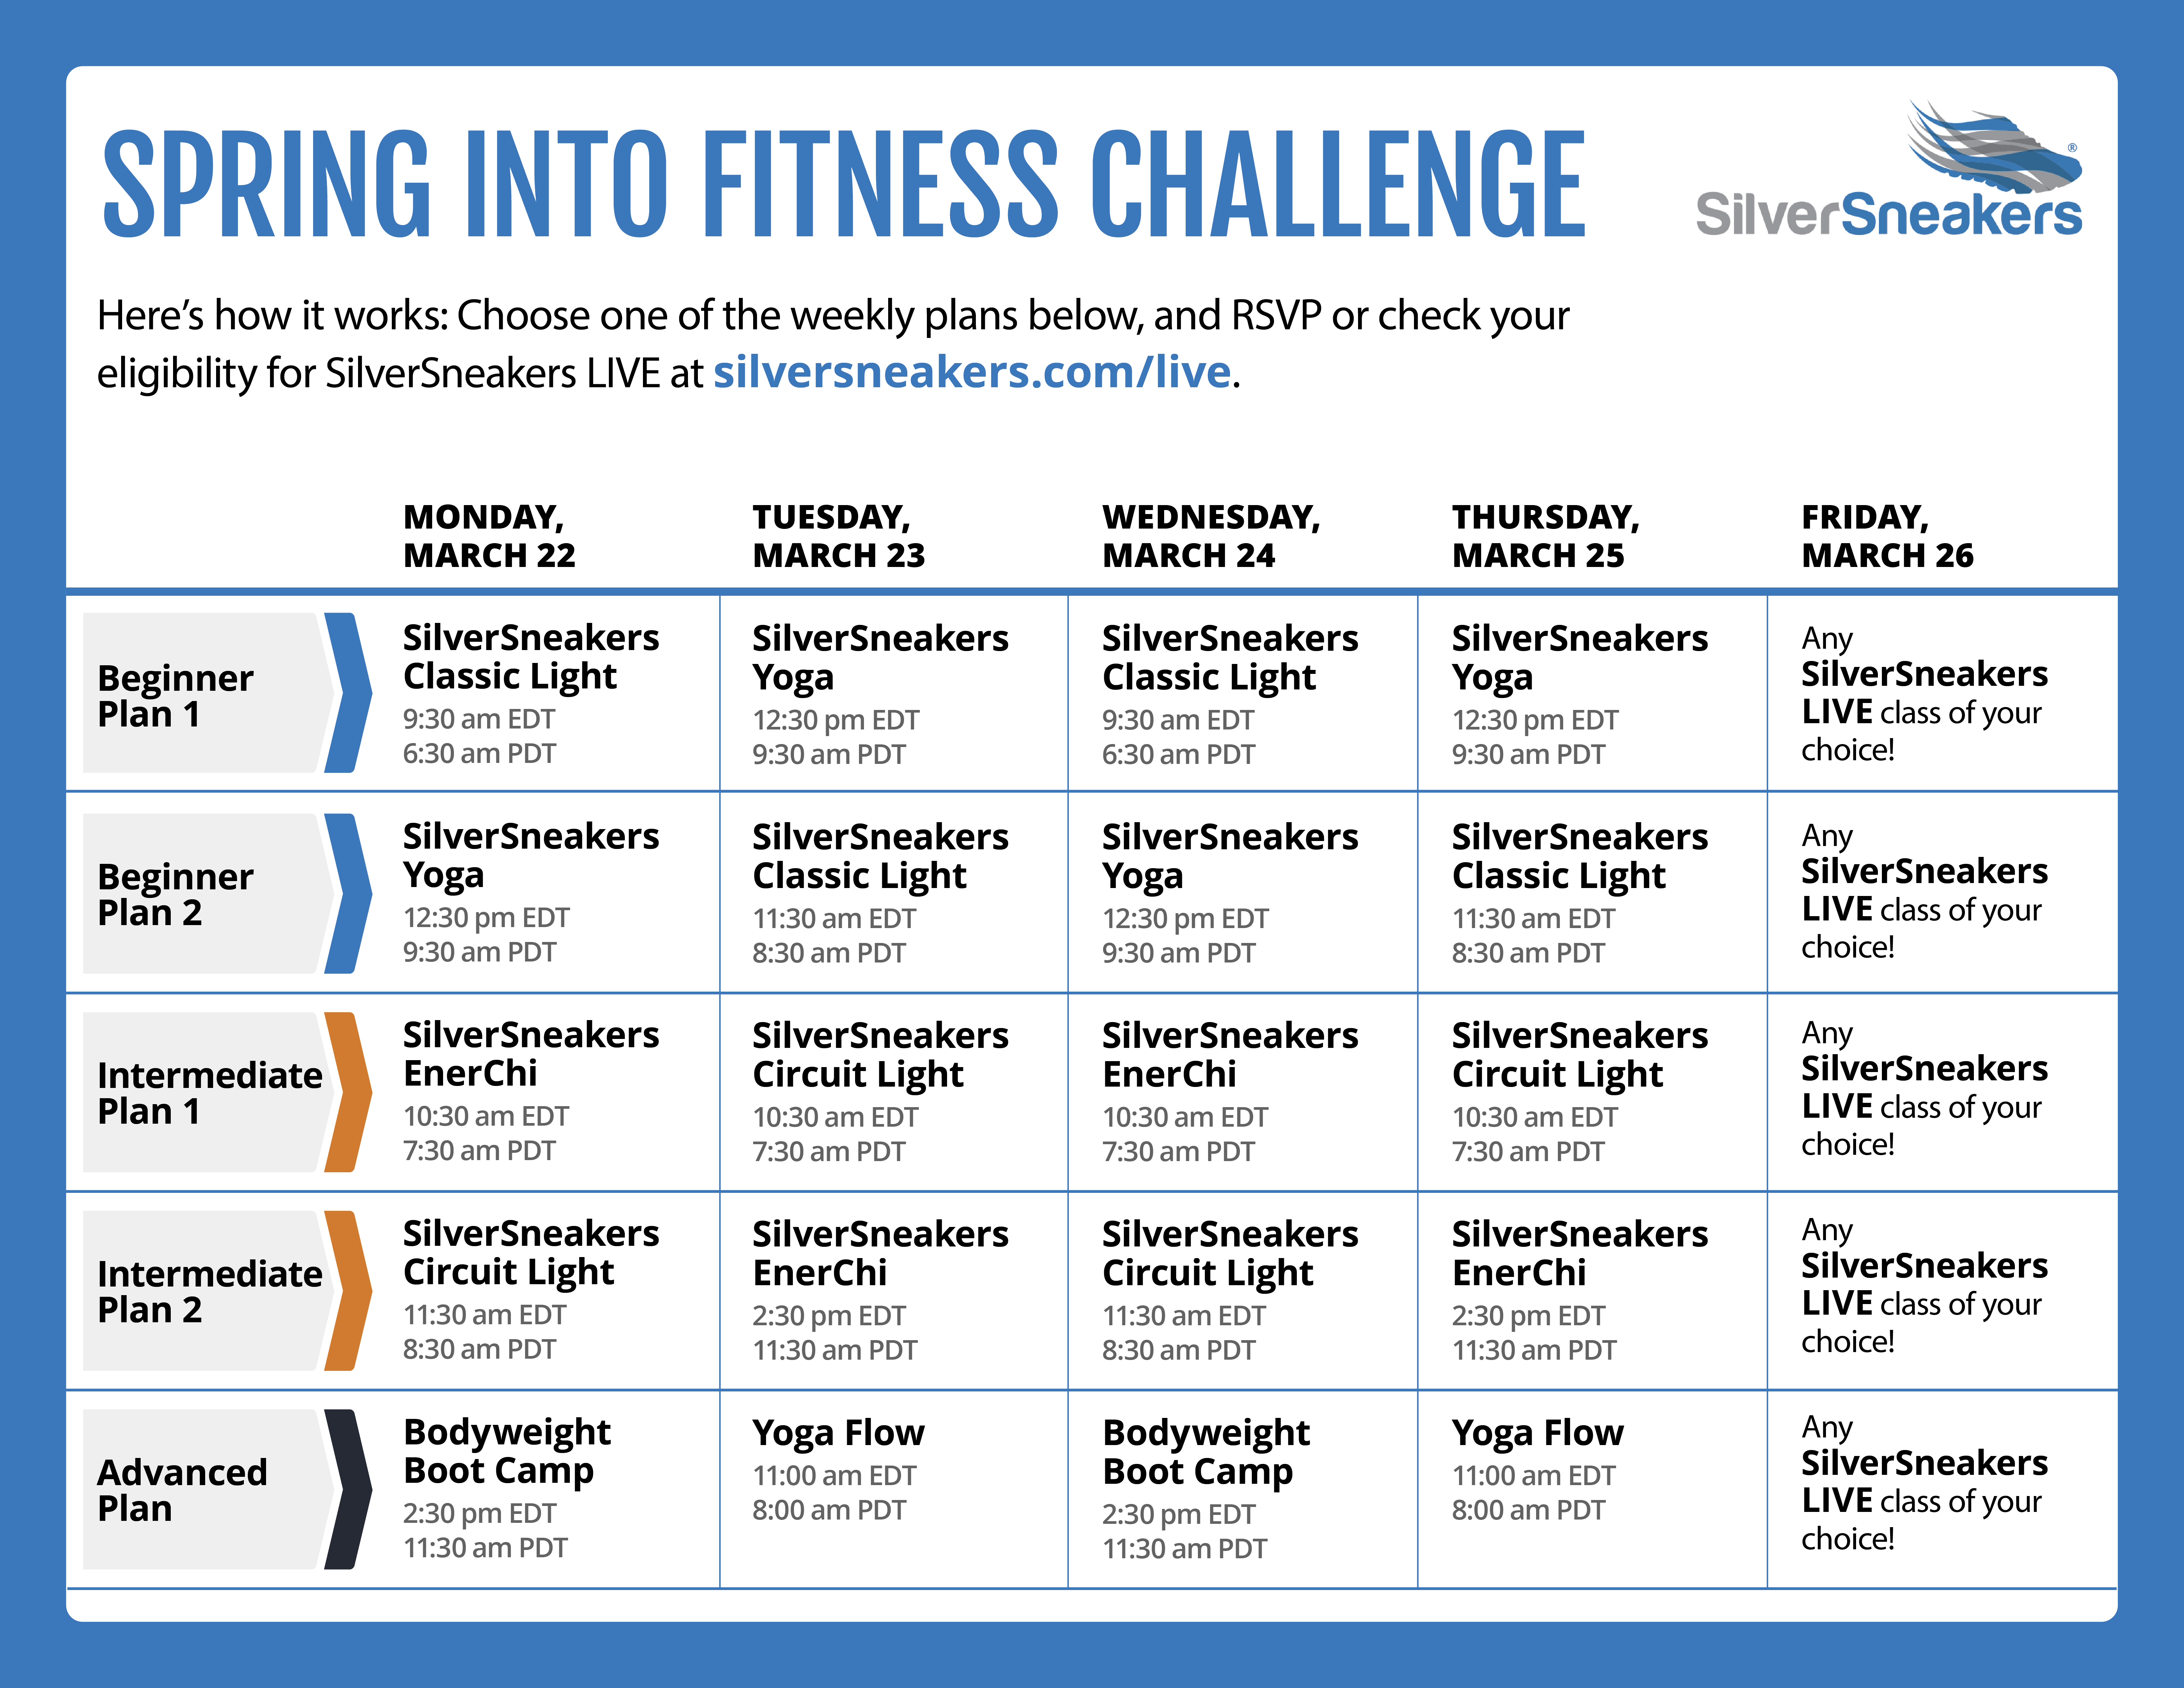 https://www.silversneakers.com/wp-content/uploads/2021/03/Spring_into_Fitness_Challenge_032221.png